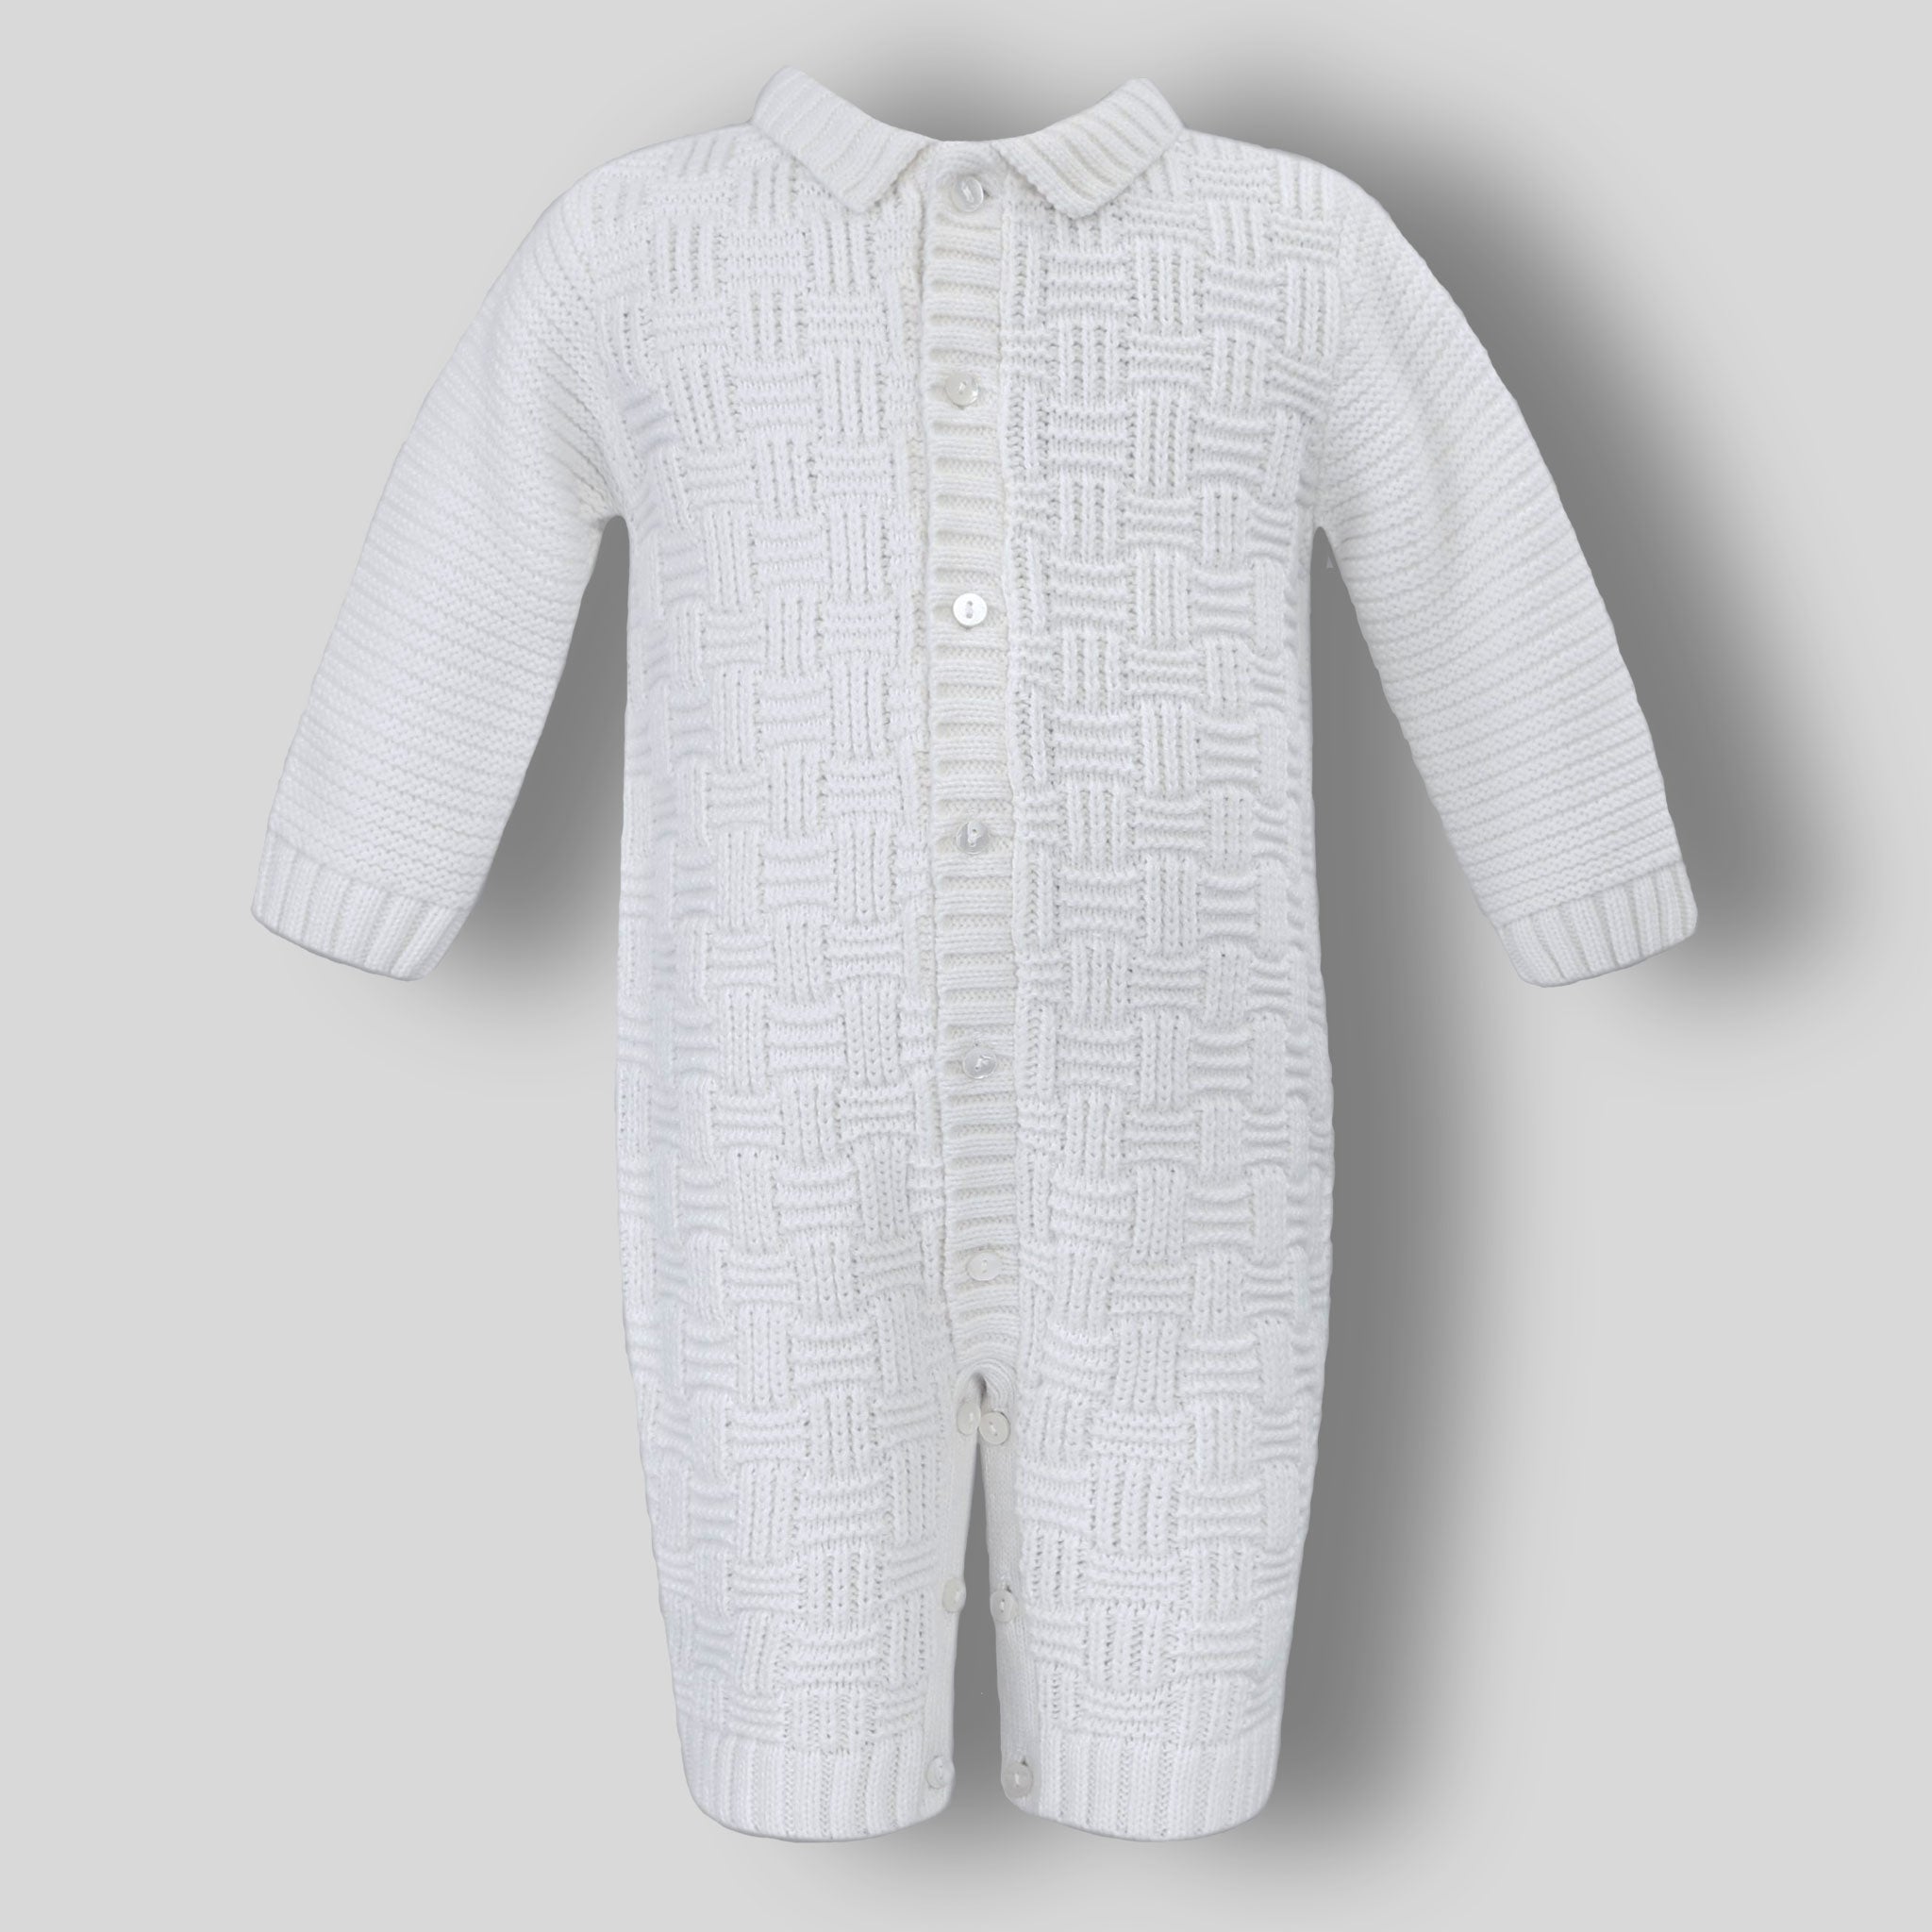 Knitted All In One Unisex Baby Outfit White- Sarah Louise 008180